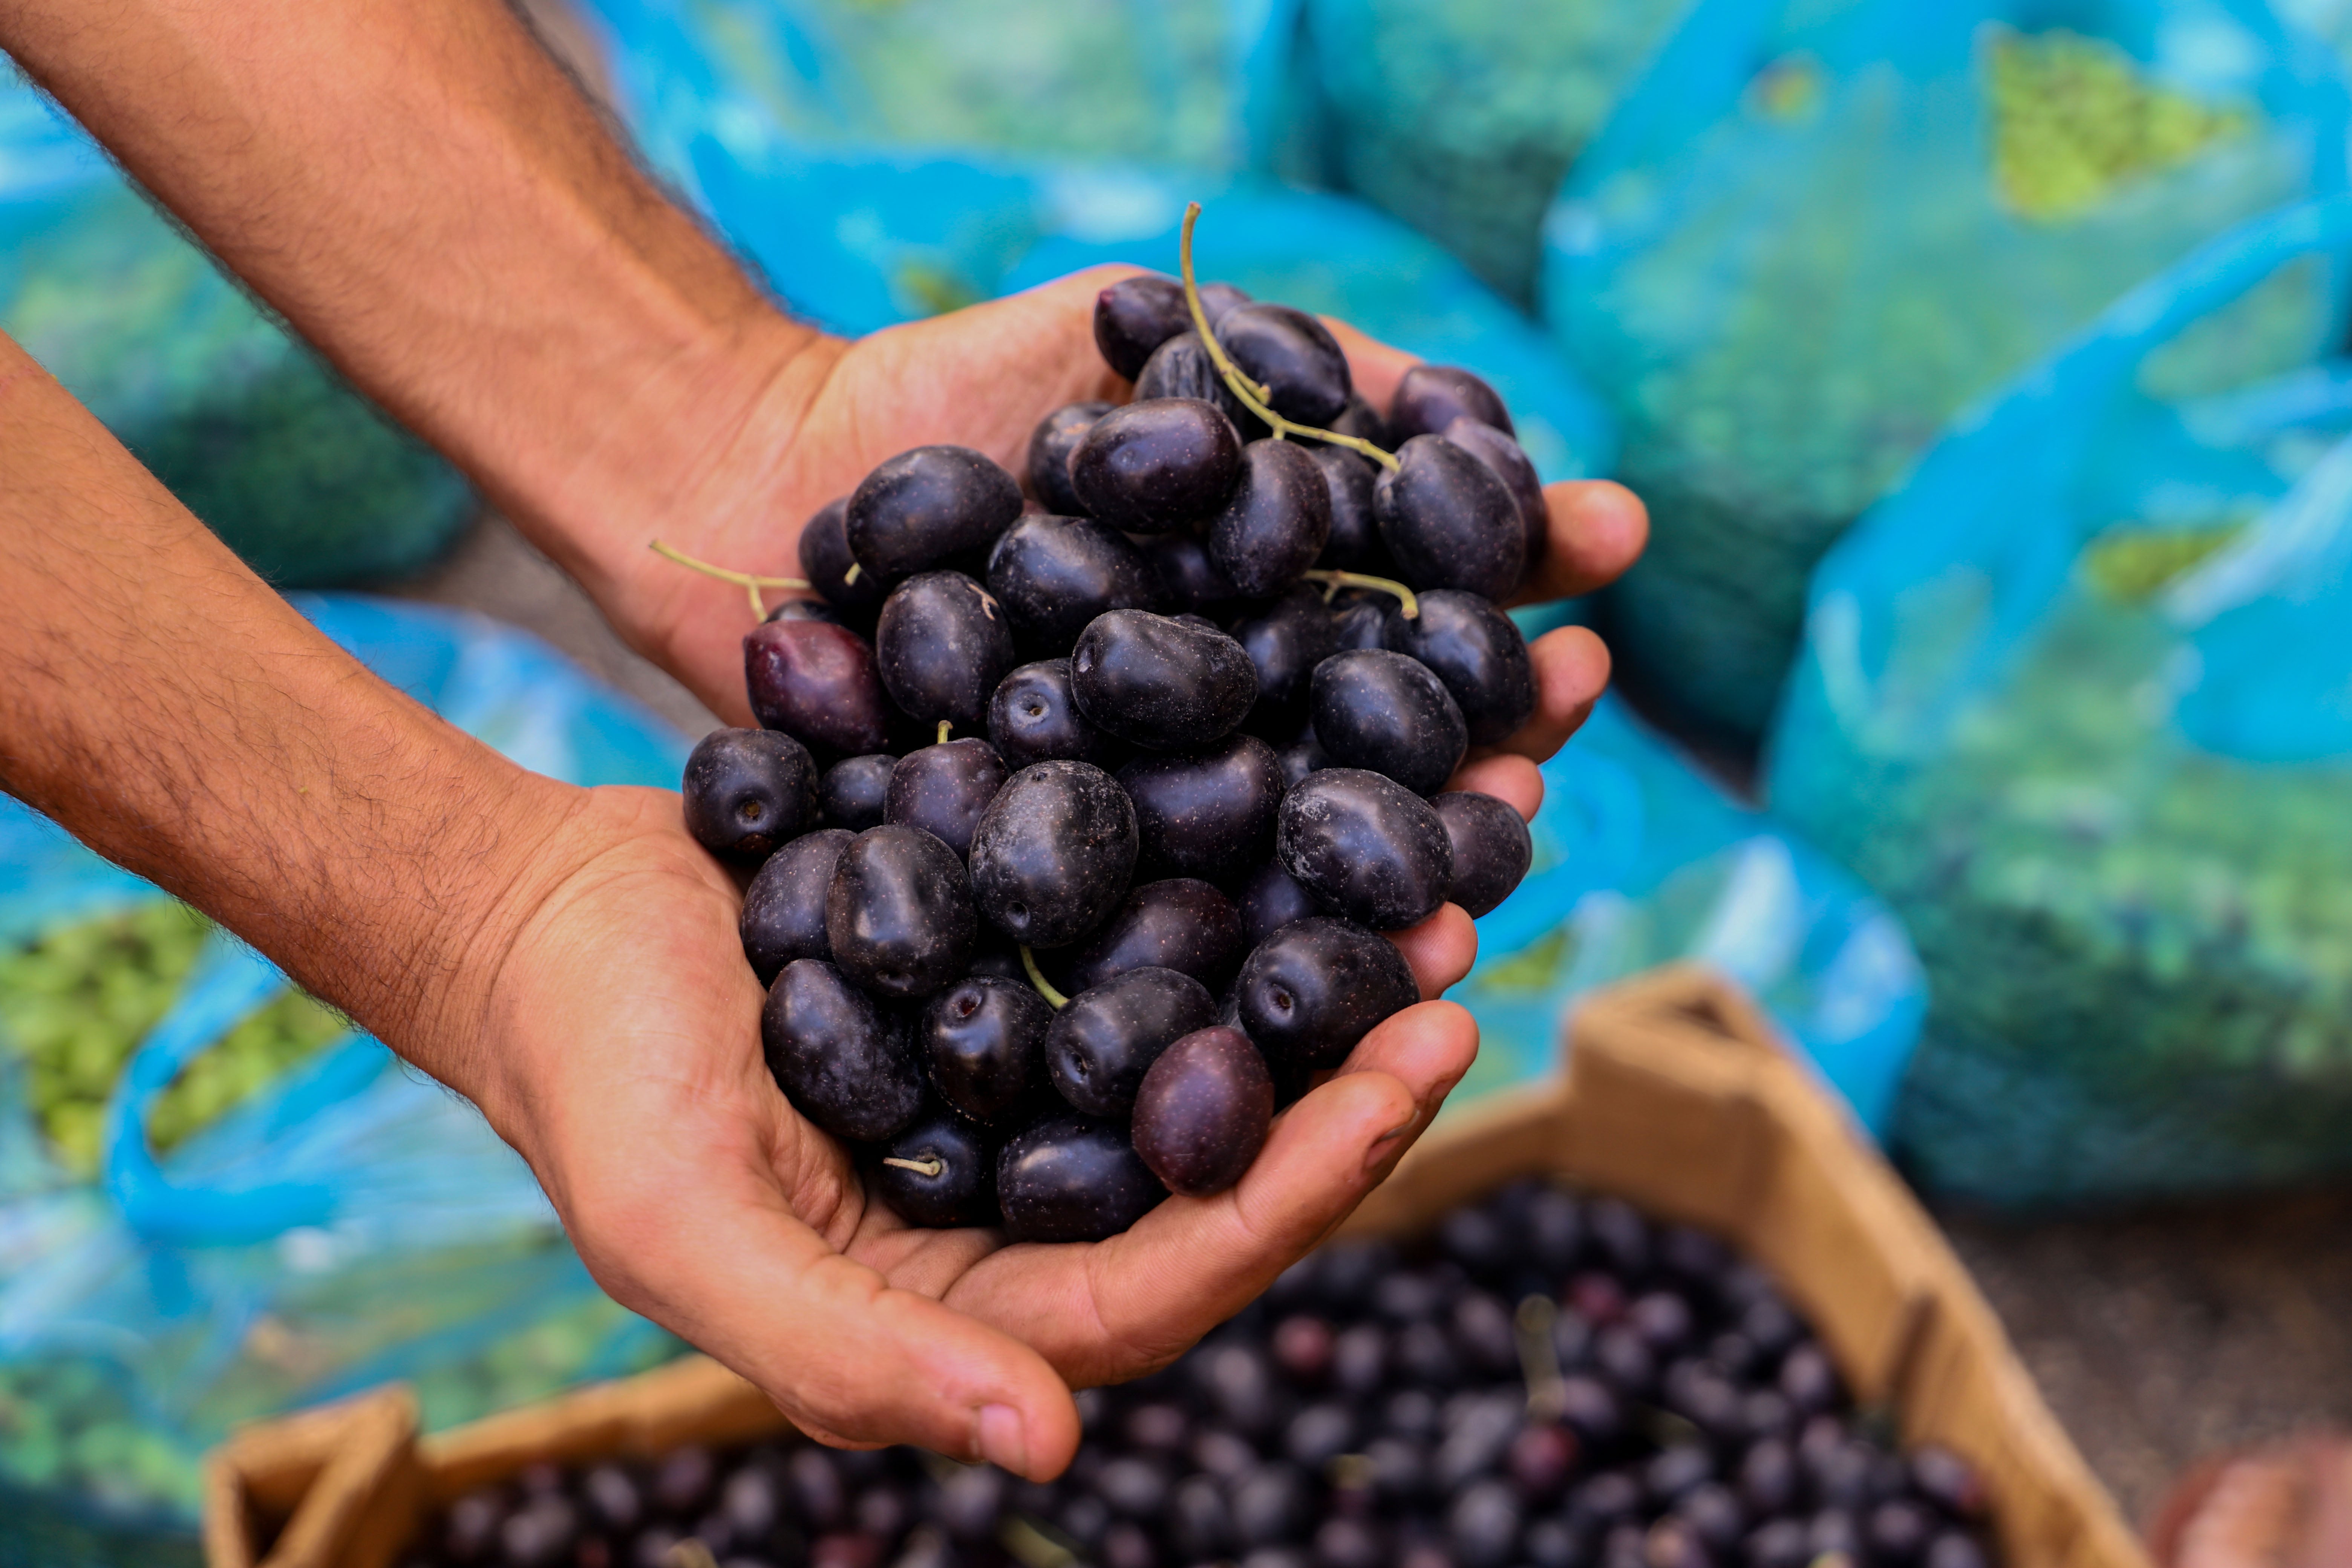 Olives are a major source of revenue for the Palestinian economy